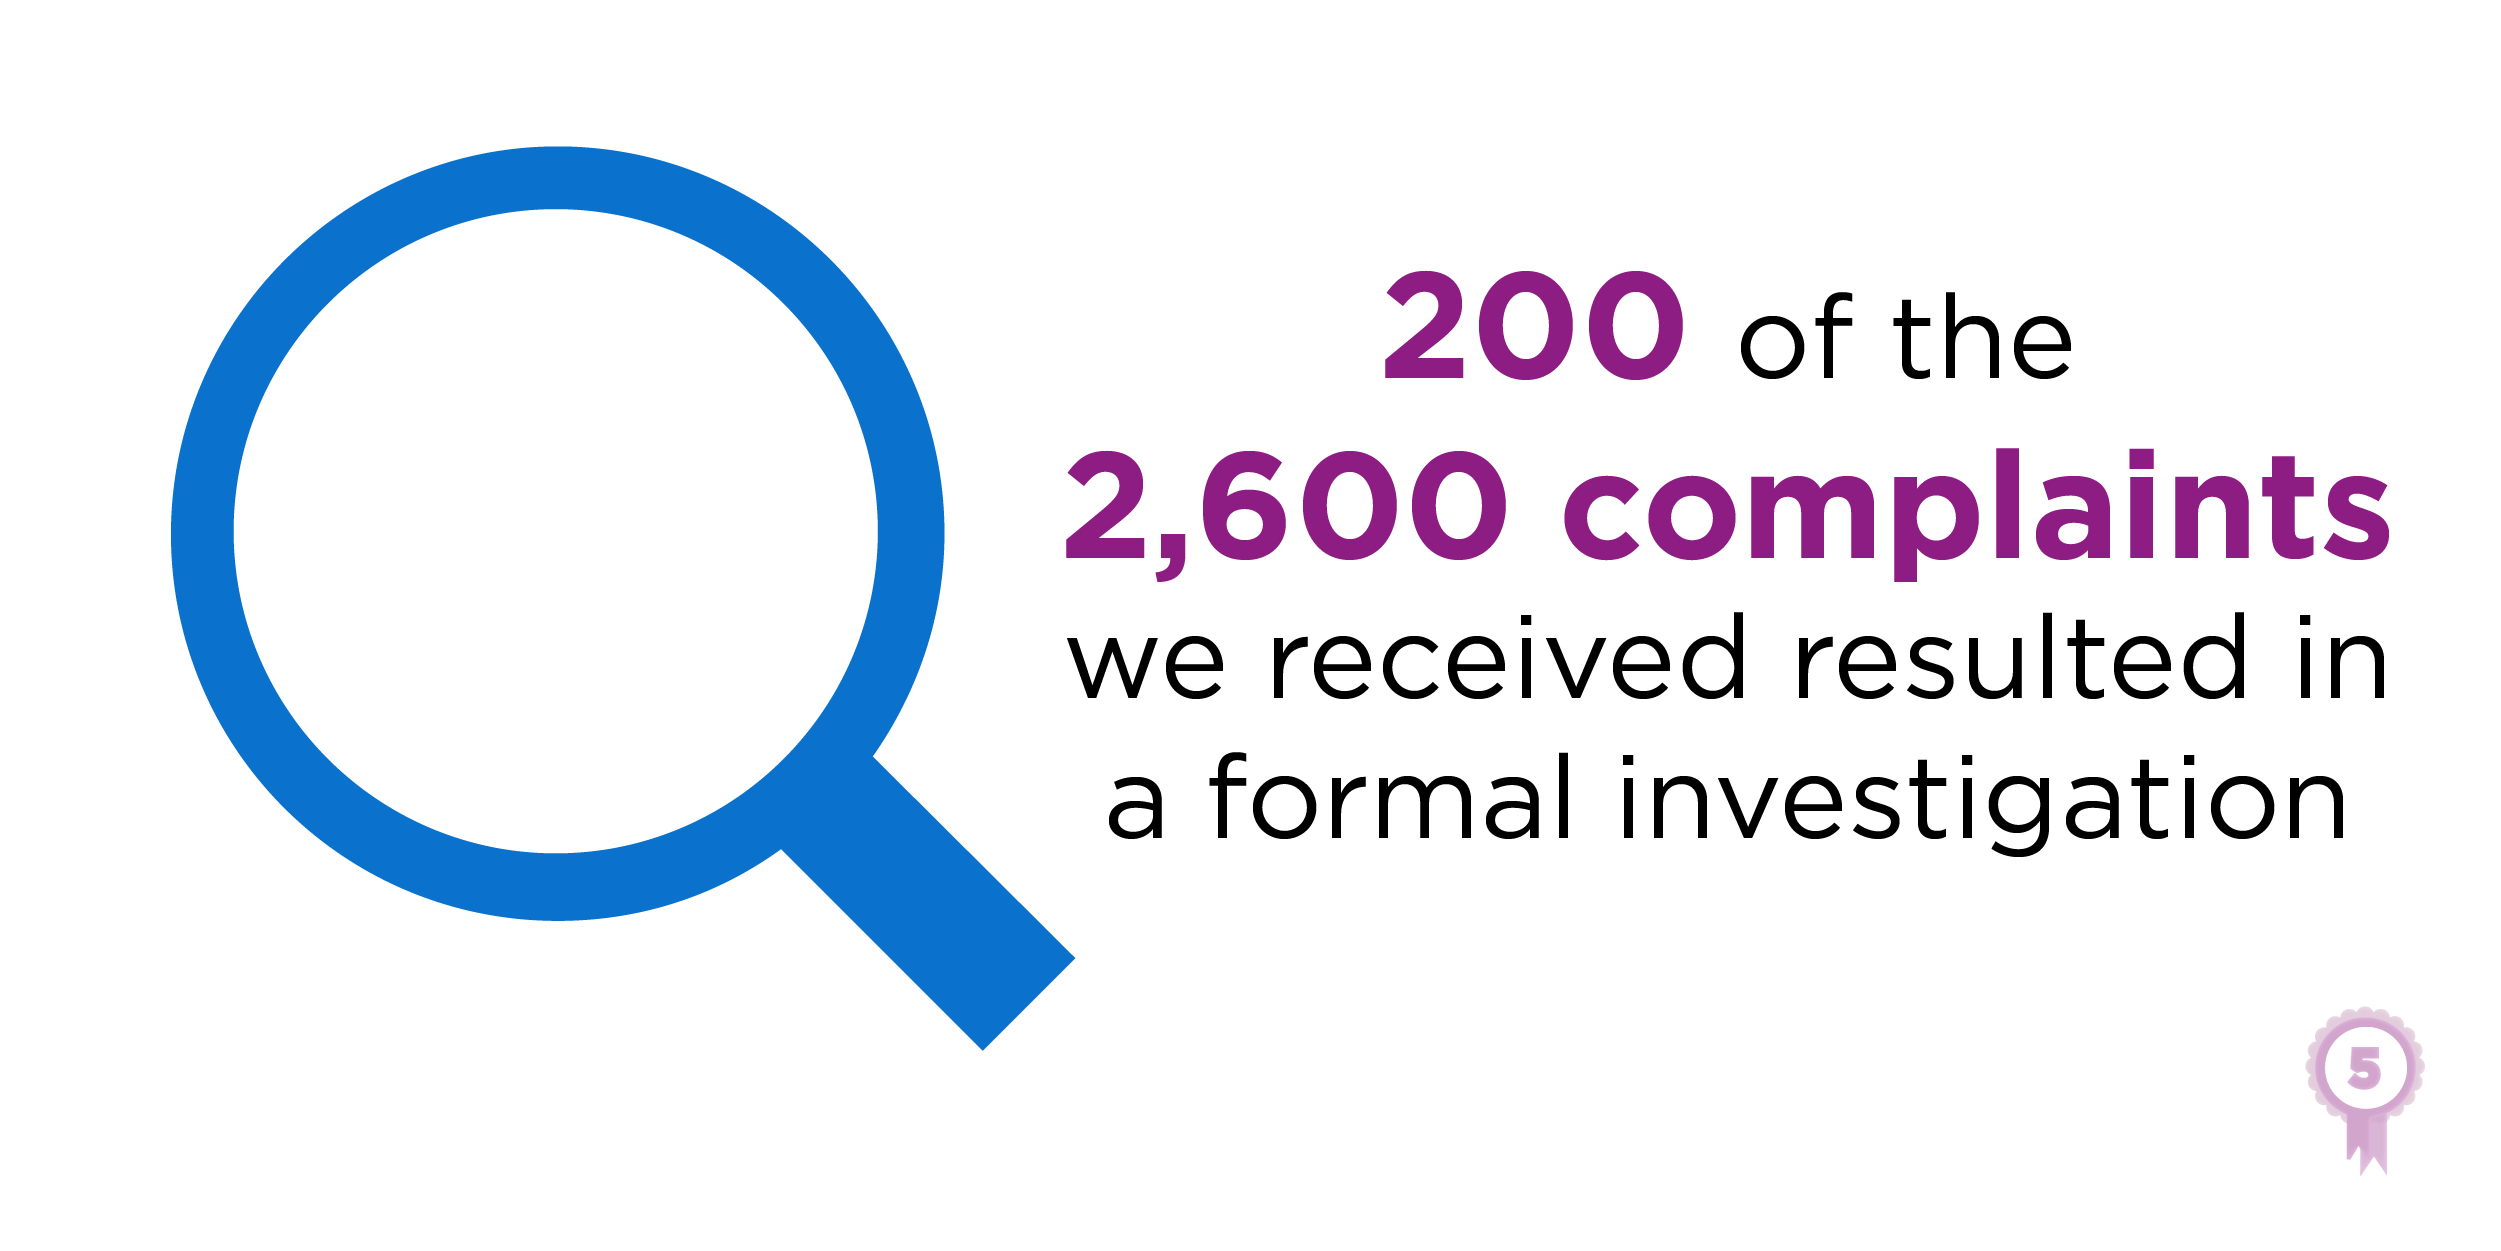 Magnifying glass and the words "200 of the 2,600 complaints we received resulted in a formal investigation"